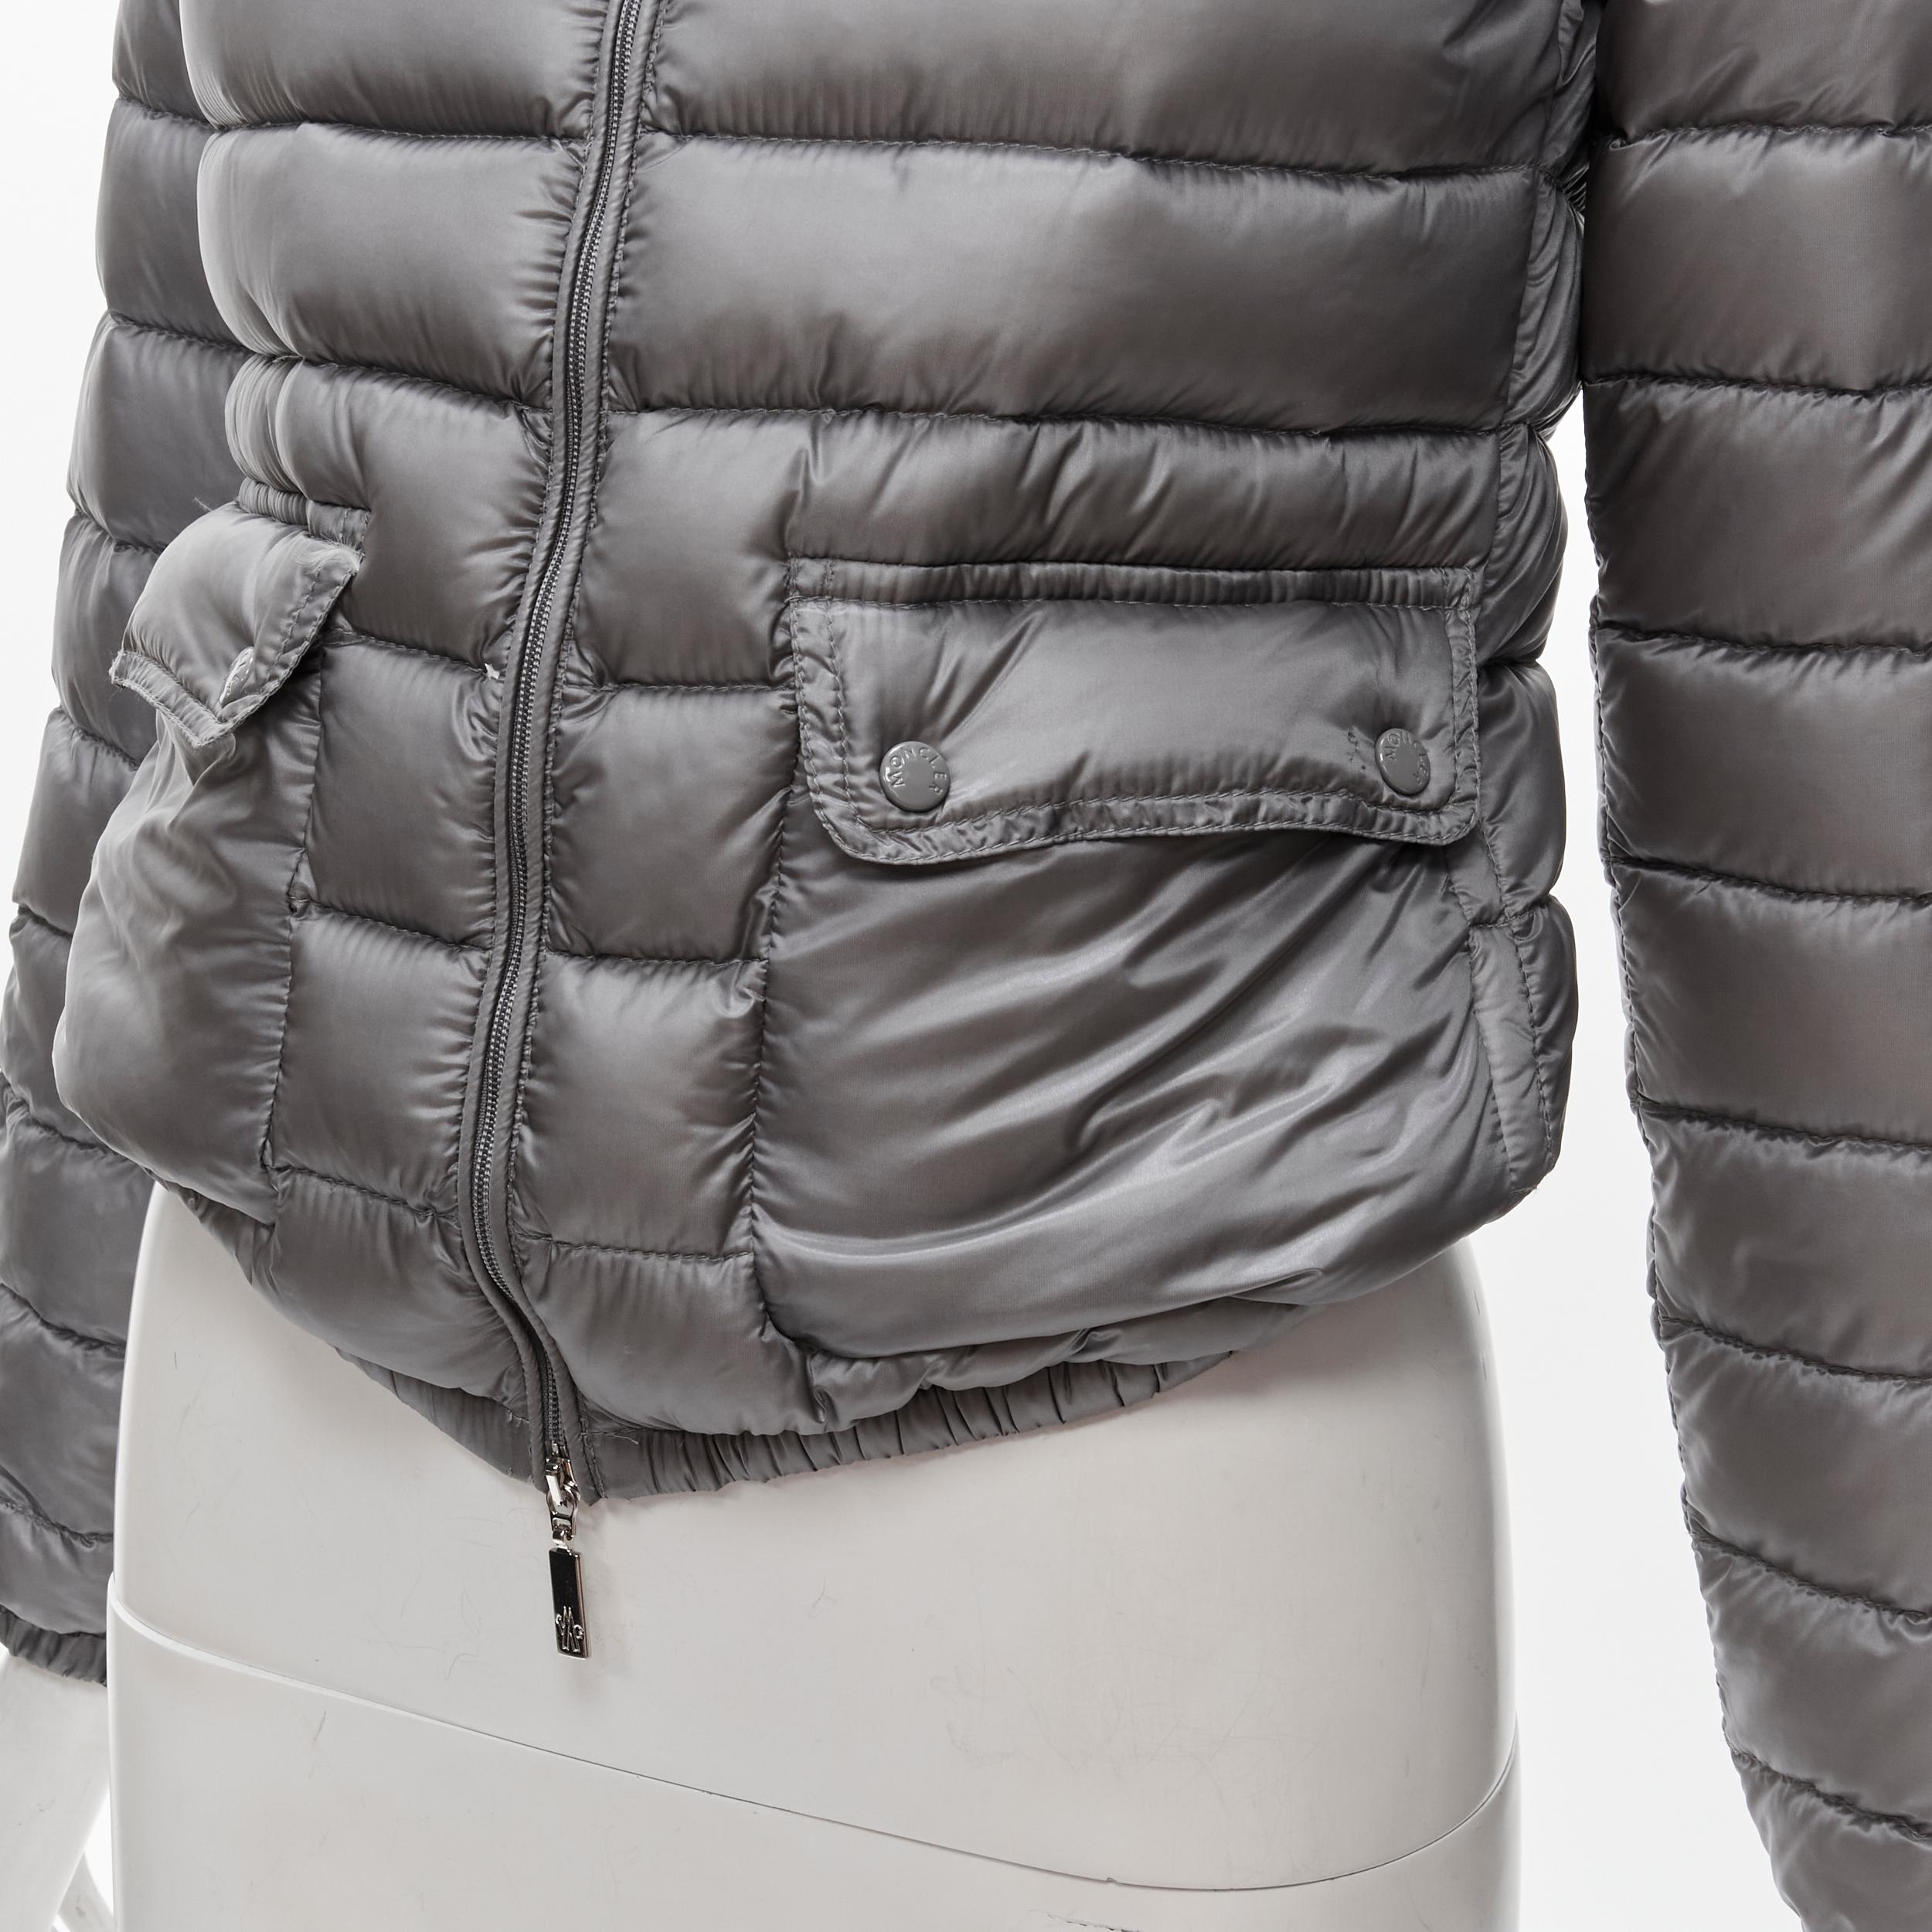 MONCLER Lans Giubbotto grey down feather padded puffer jacket US0 XS
Brand: Moncler
Material: Nylon
Color: Grey
Pattern: Solid
Closure: Zip
Extra Detail: Light grey nylon with 90% down, 10% feather padding. zip front closure. Dual patch pocket with